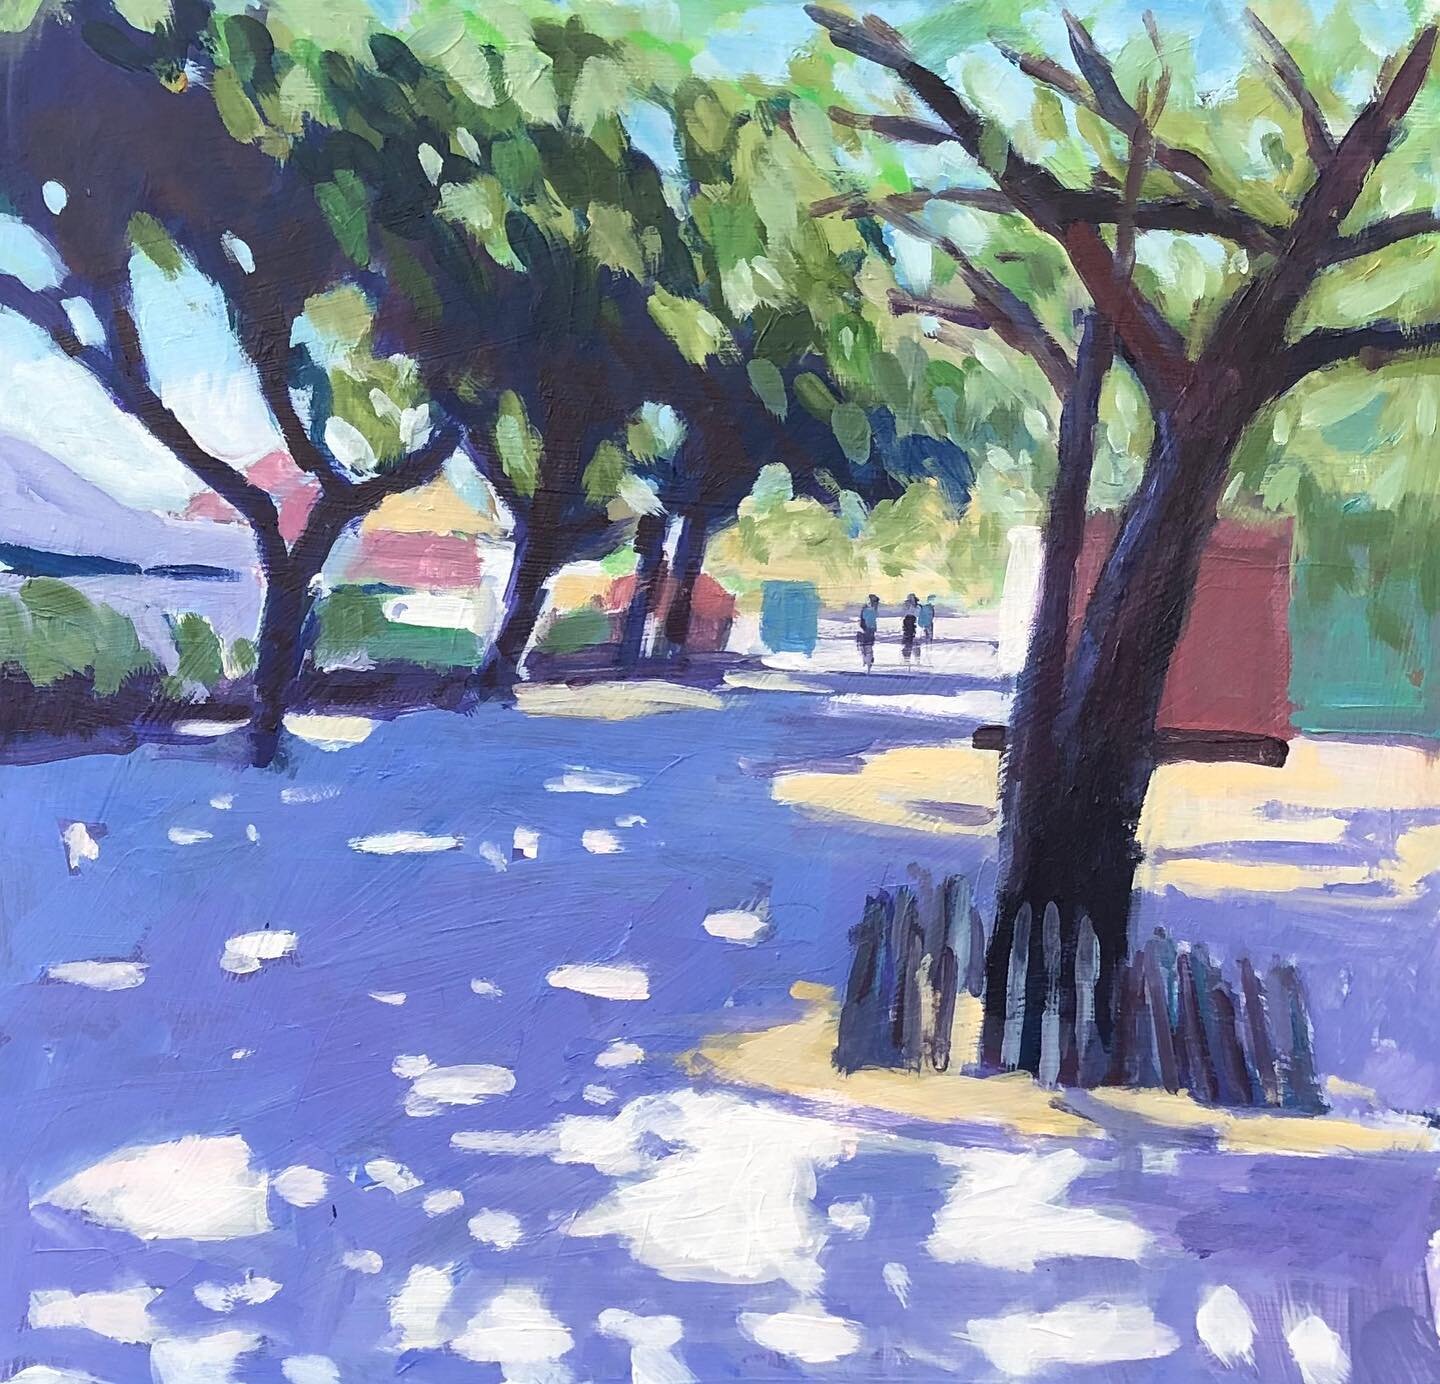 Under the Pines - the finished version #hughfairfaxoriginals #hyeres #southoffrance #spring #oilpaintings